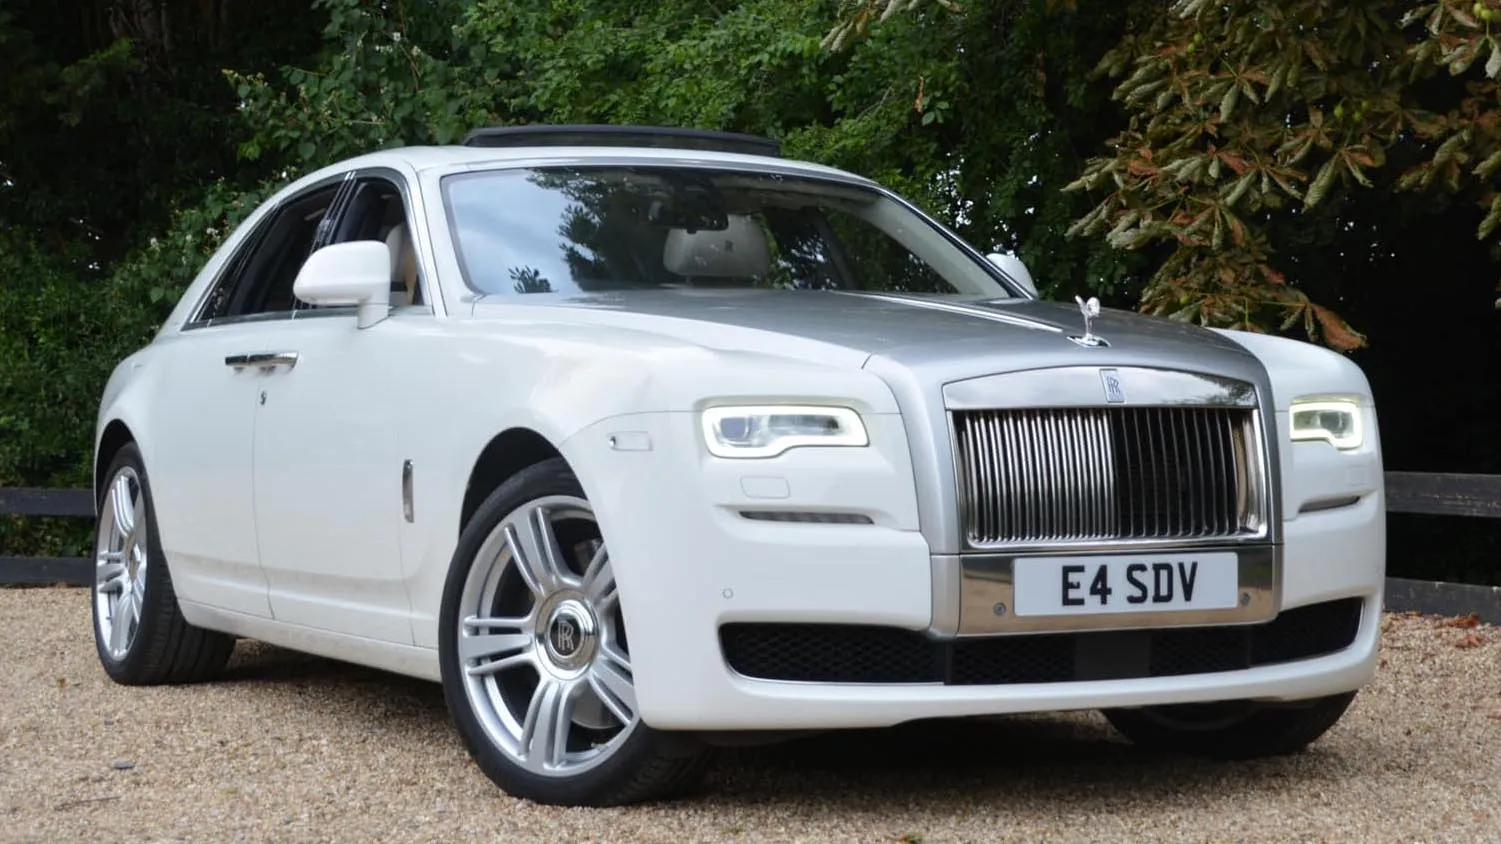 Modern white Rolls-Royce Phantom with its large chrome alloy wheels and iconic chrome front grill in attendance at a popular wedding venue in Colchester in Essex.